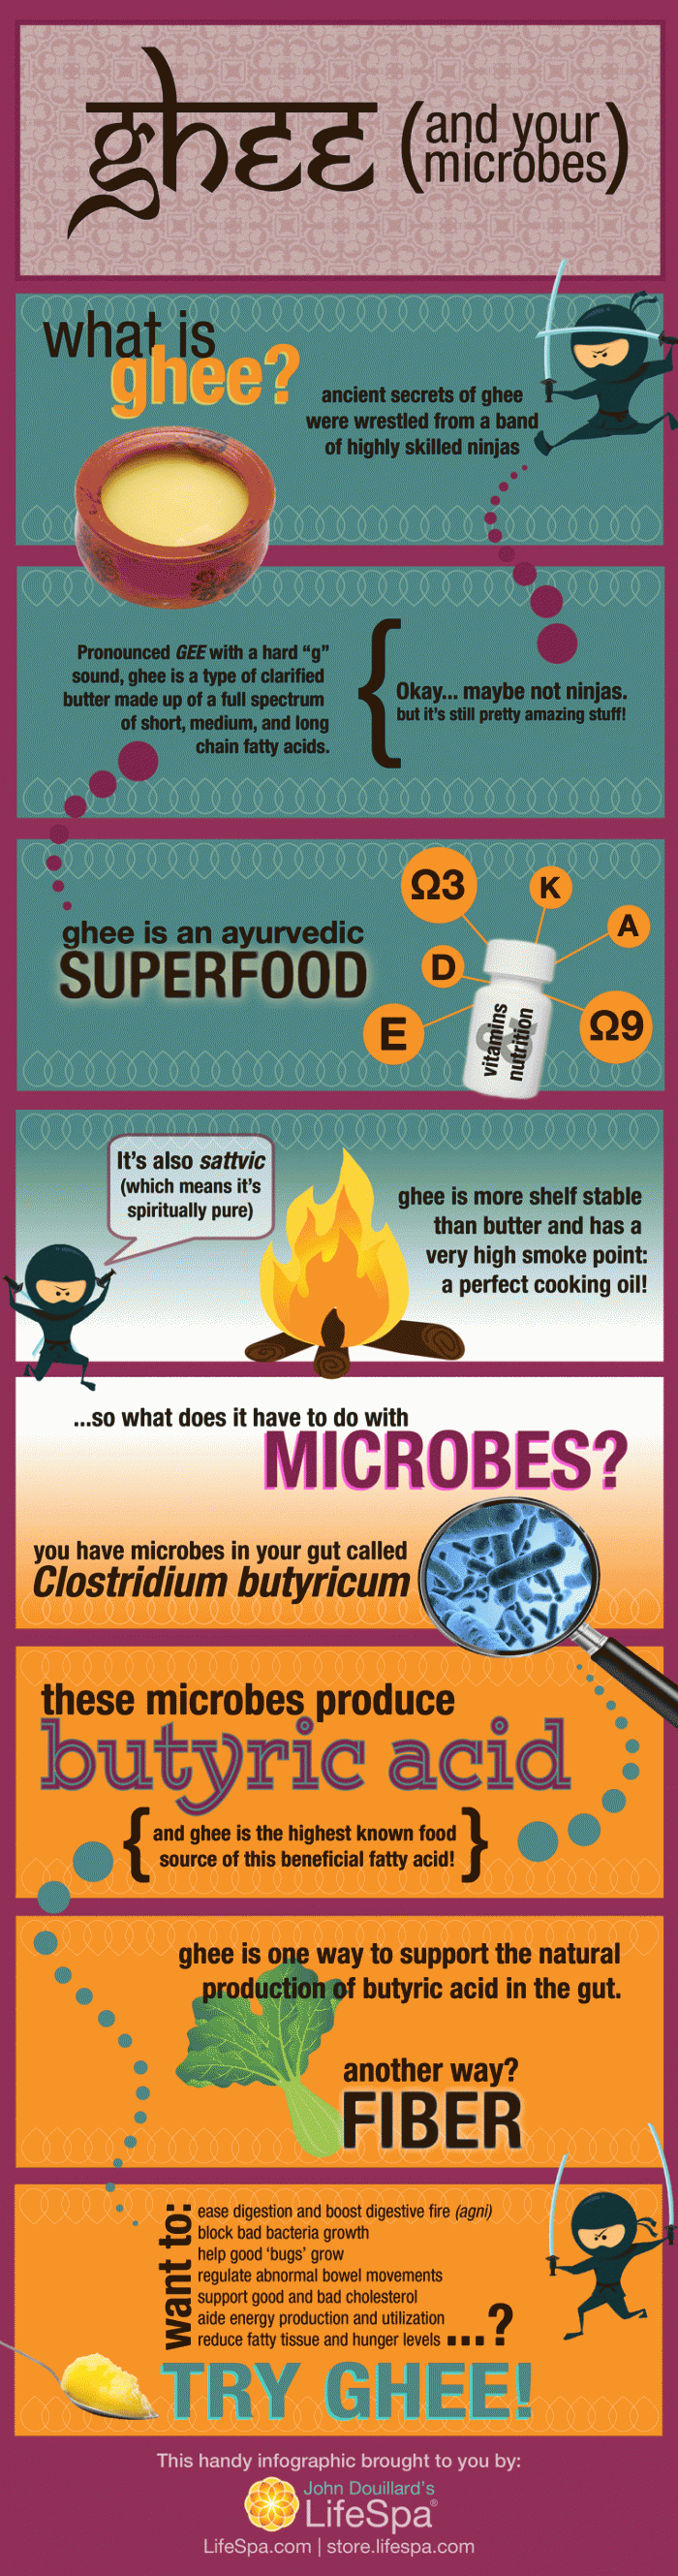 ghee and your microbes infographic